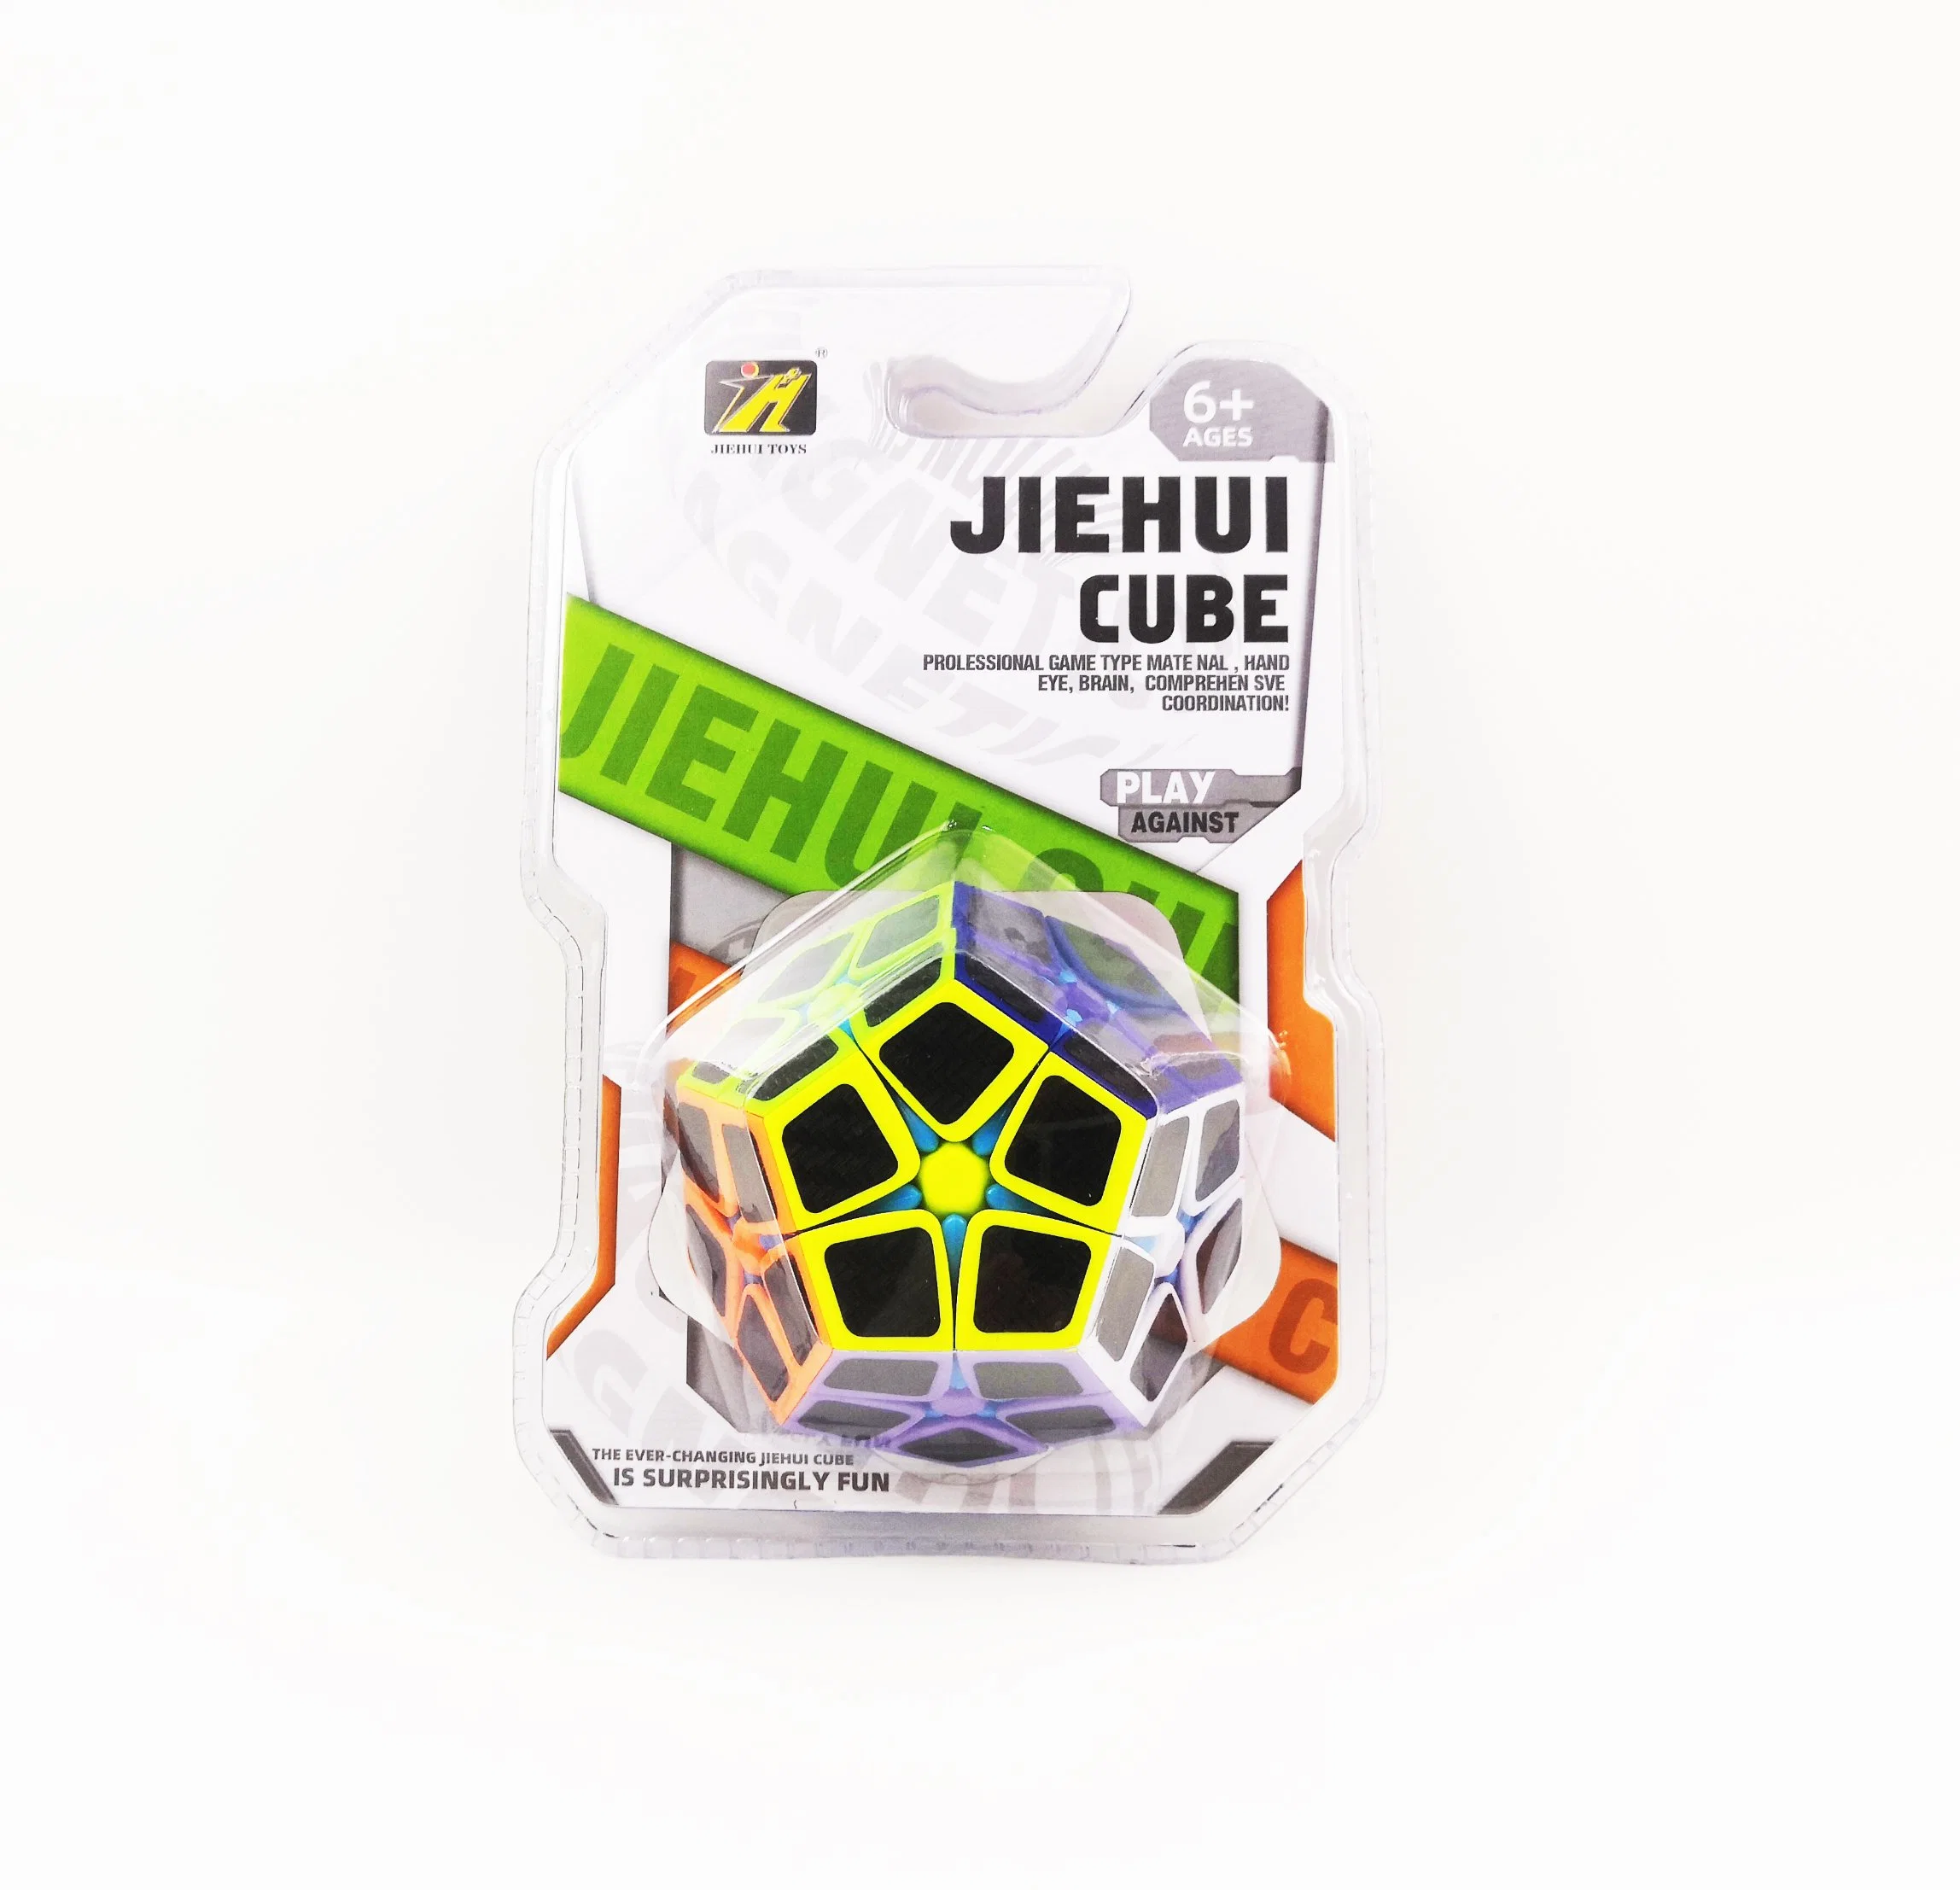 2023 Cube Pyramid Cube Children's Educational Toys Develop Intellectual Stress Reduction Cube